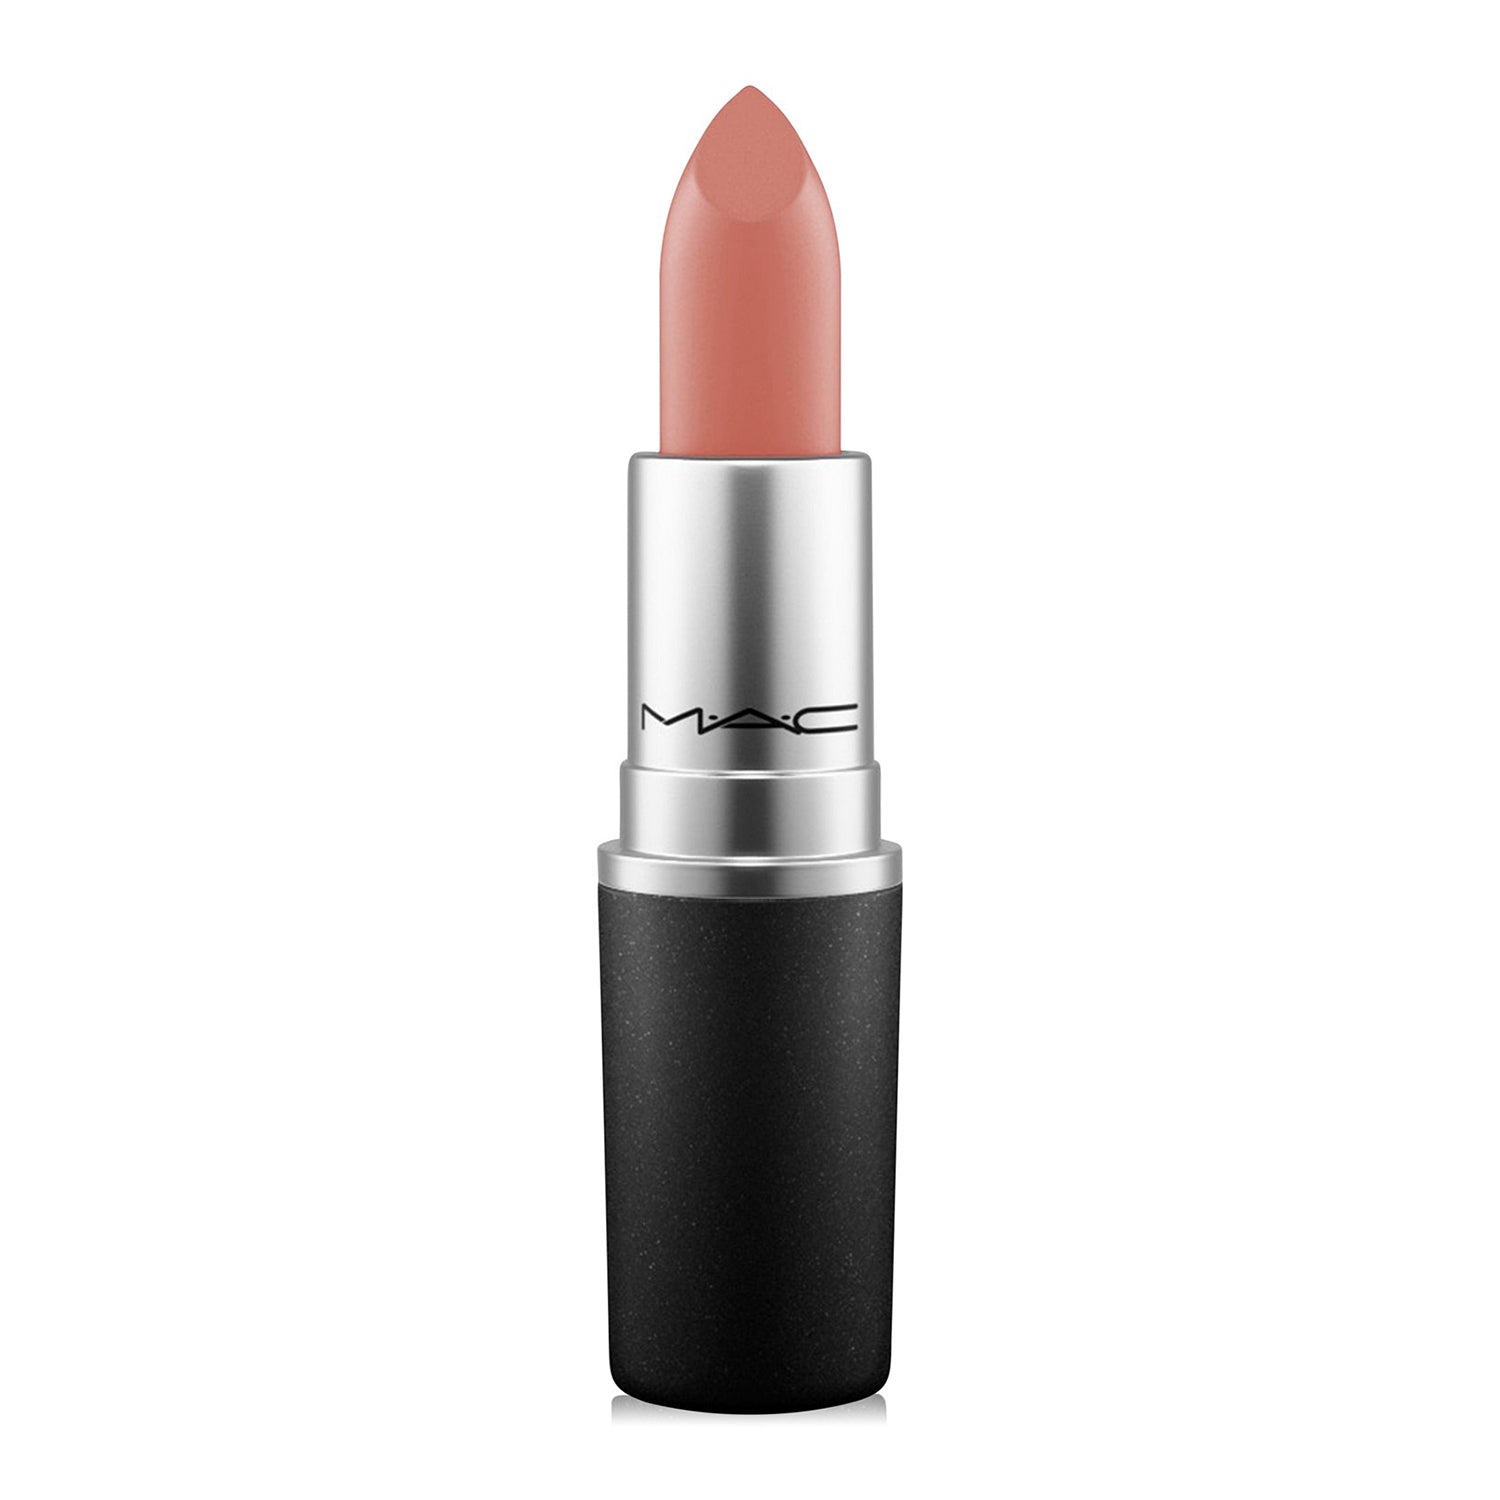 Shop MAC Lipstick in Velvet Teddy shade available at Heygirl.pk for delivery in Pakistan